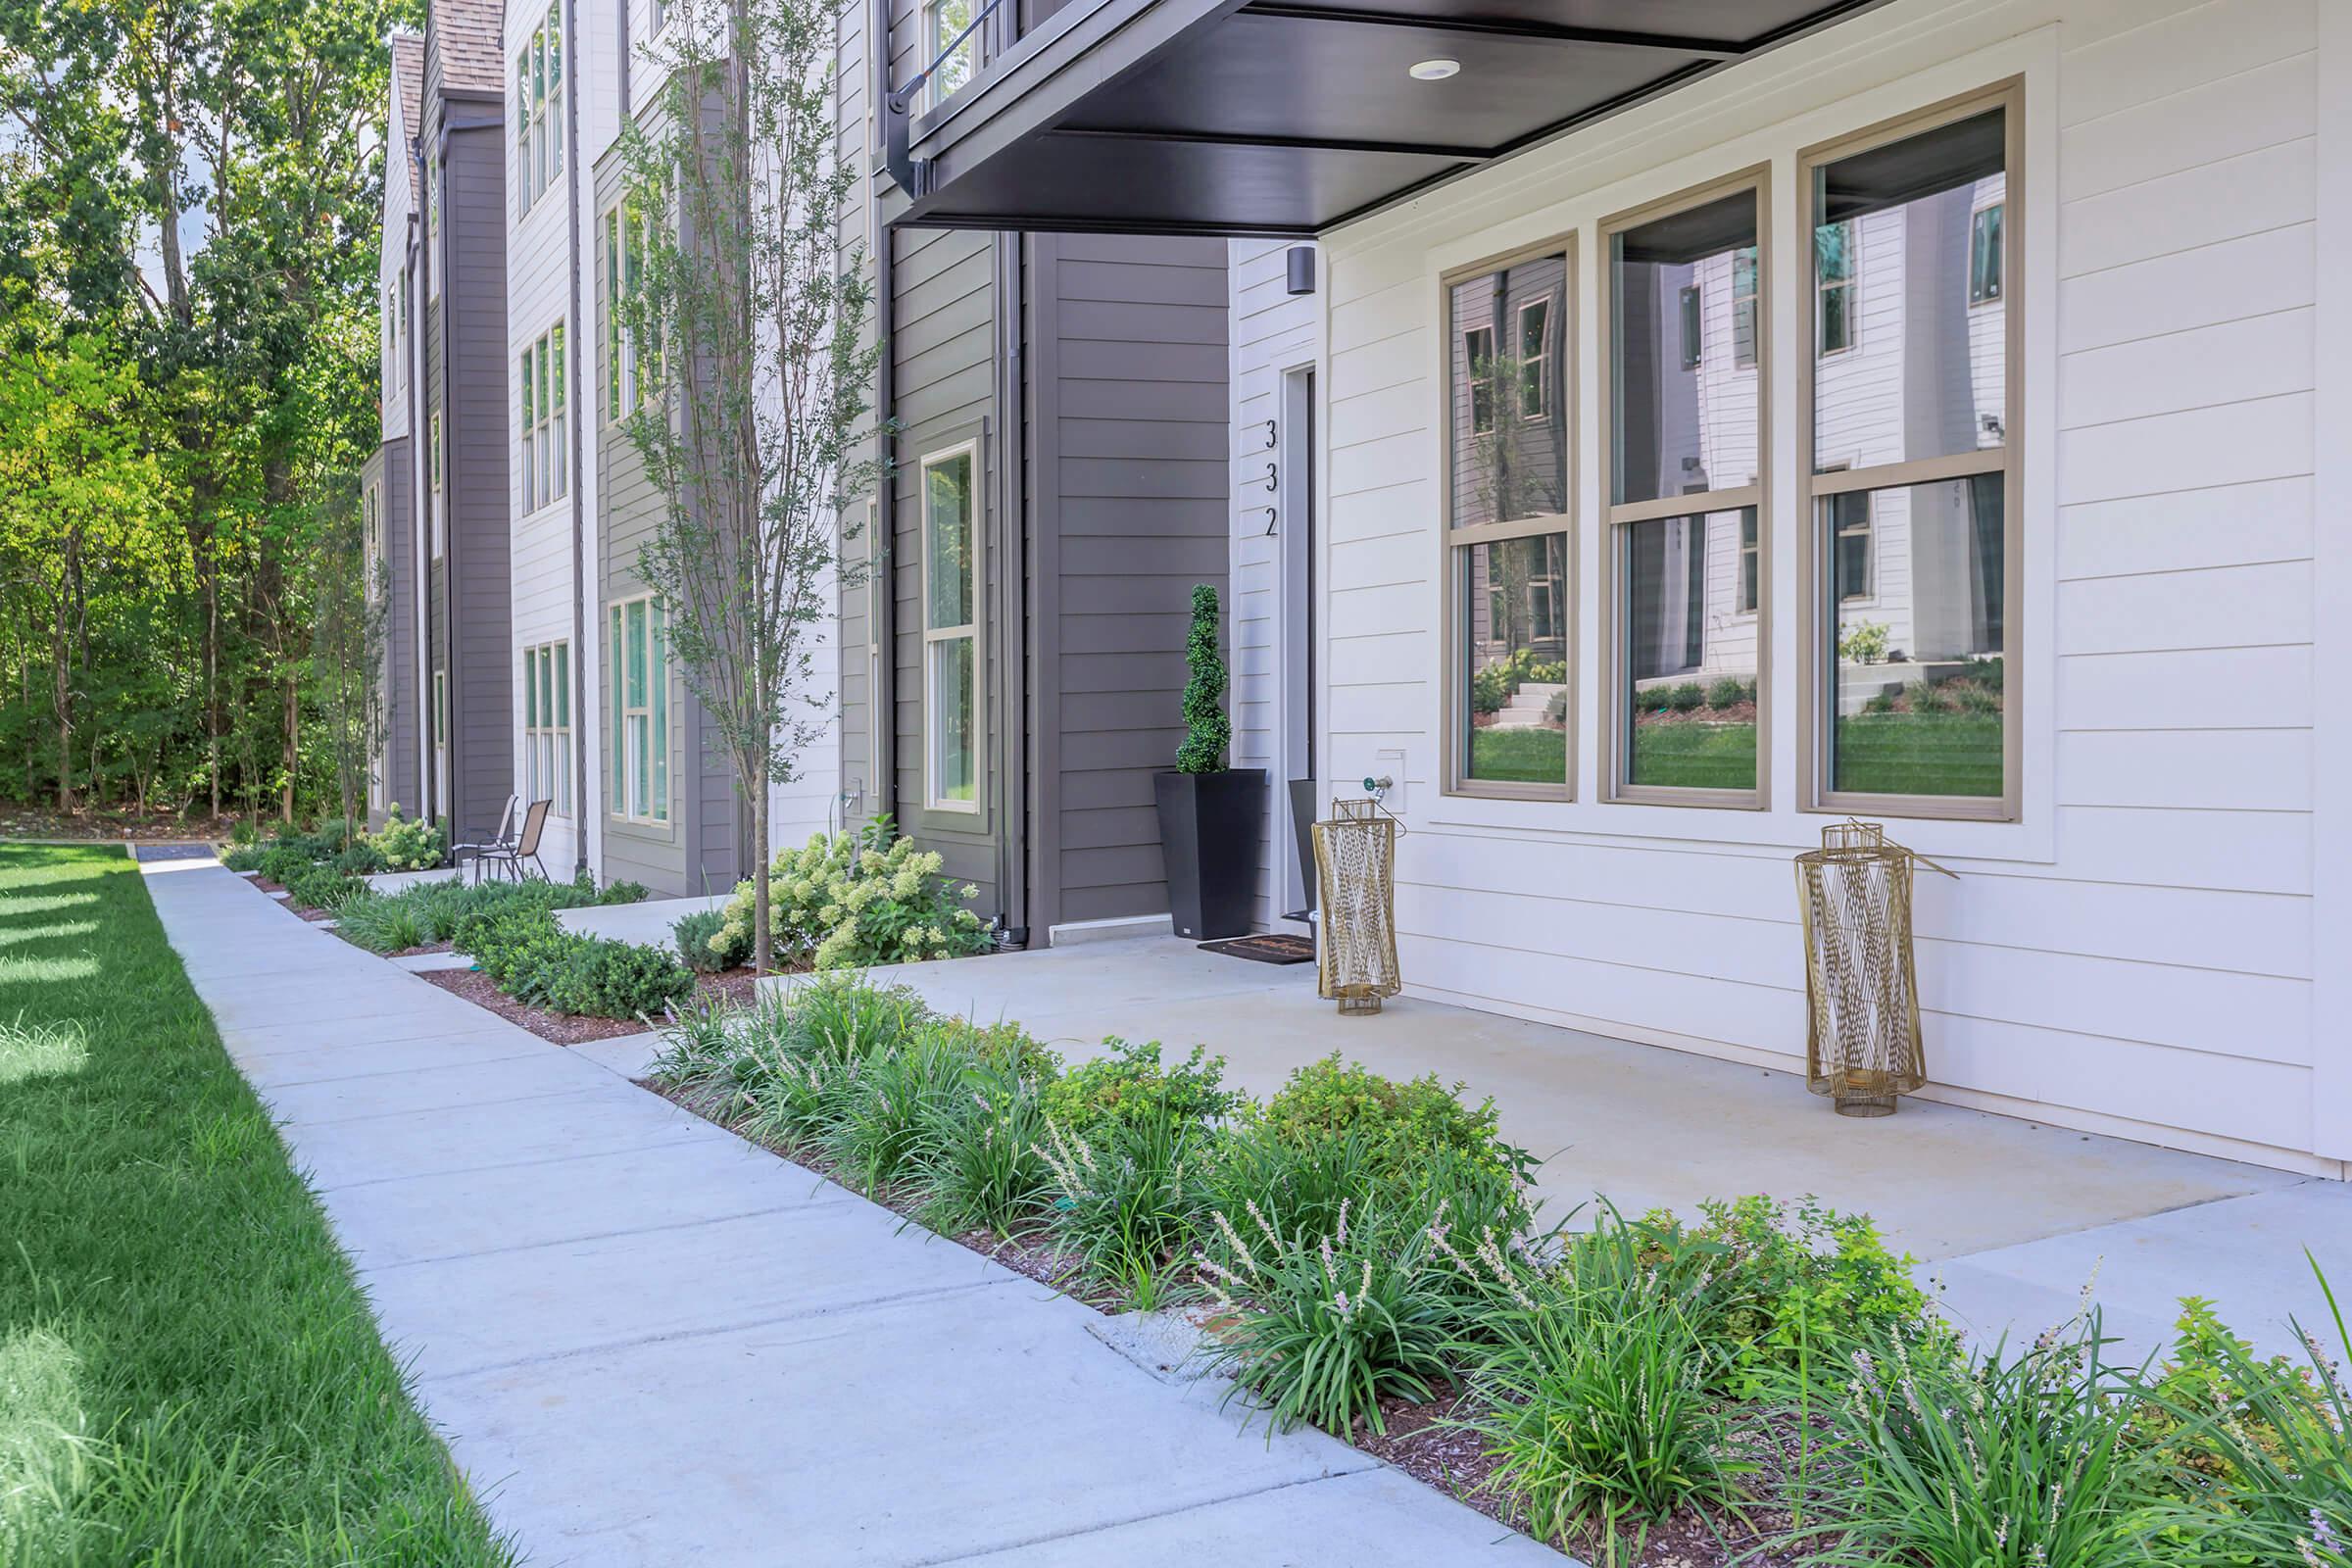 A look at the front door area of the townhomes offered at East End Village